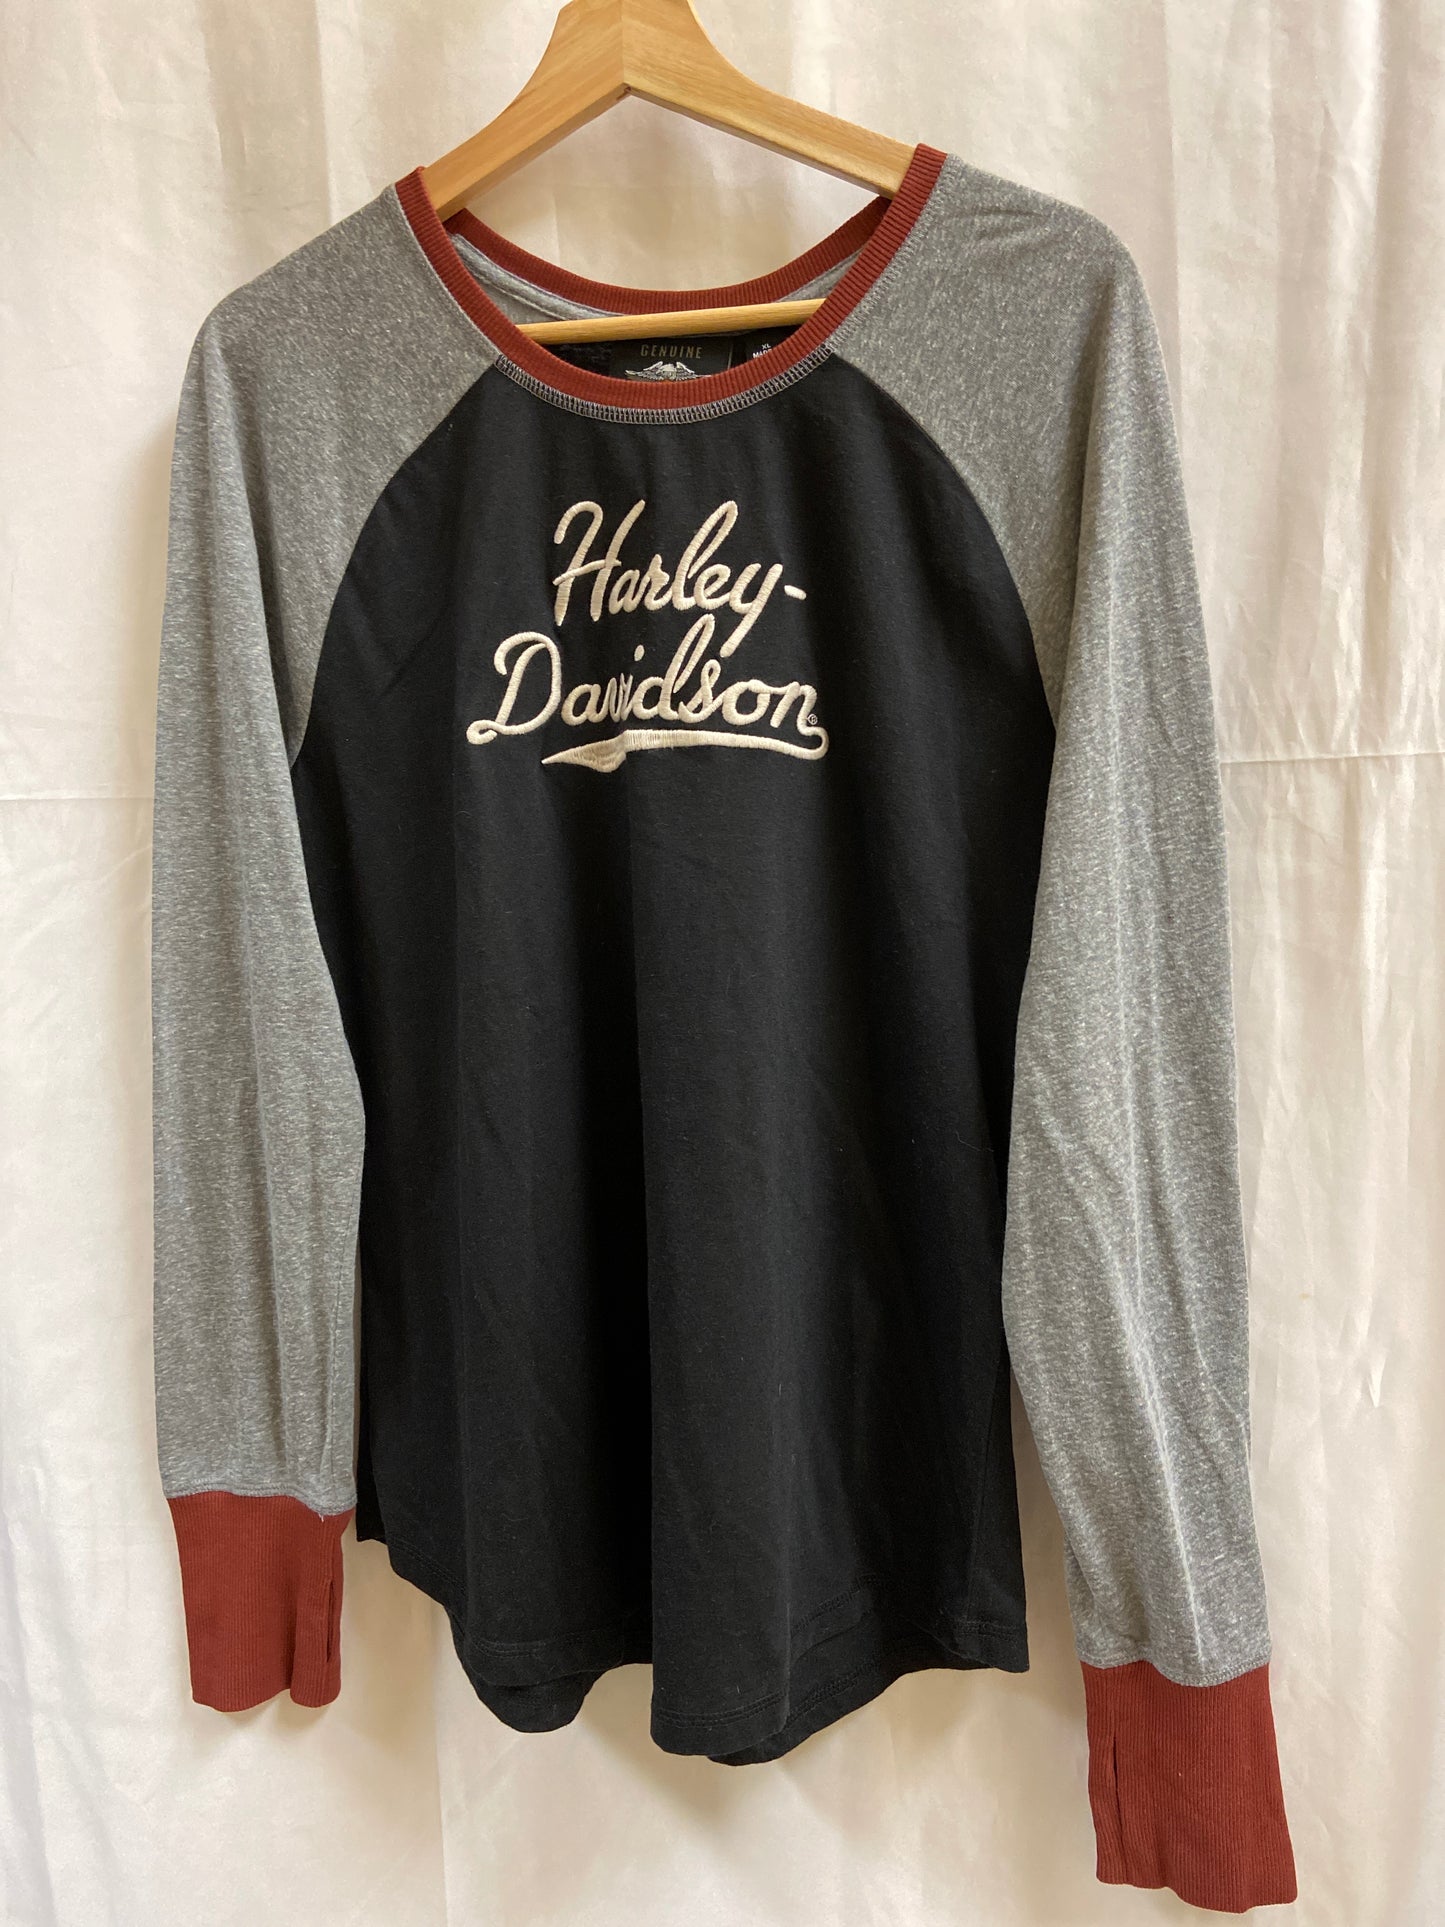 Top Long Sleeve By Harley Davidson  Size: Xl